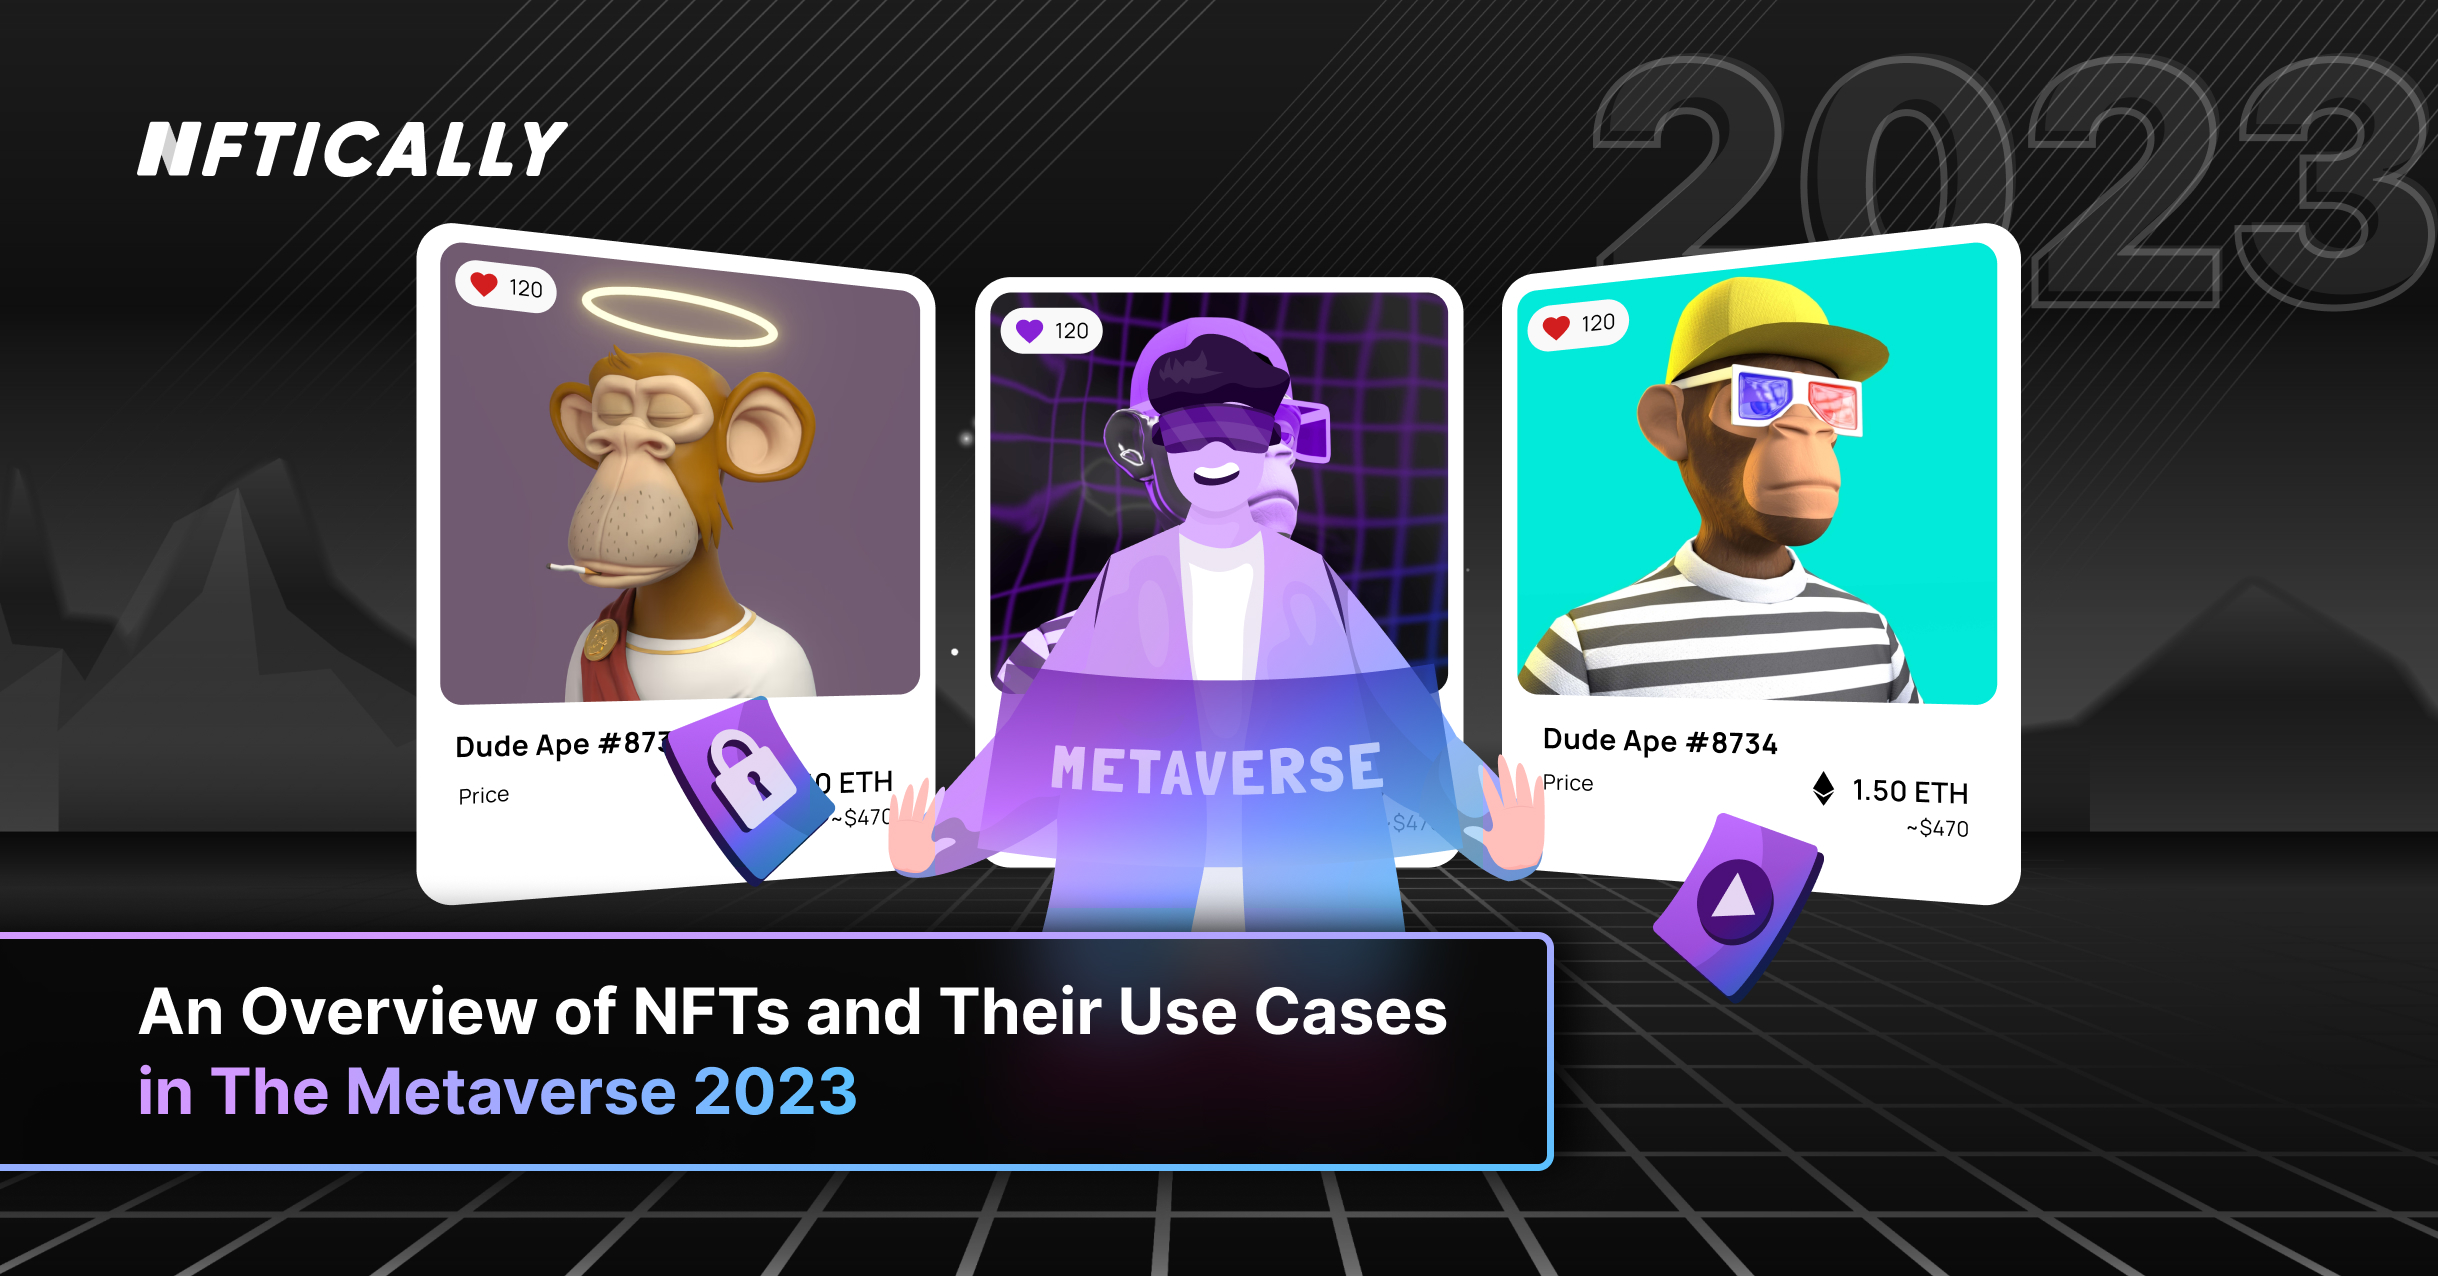 NFTs and Their Use Cases in The Metaverse 2023